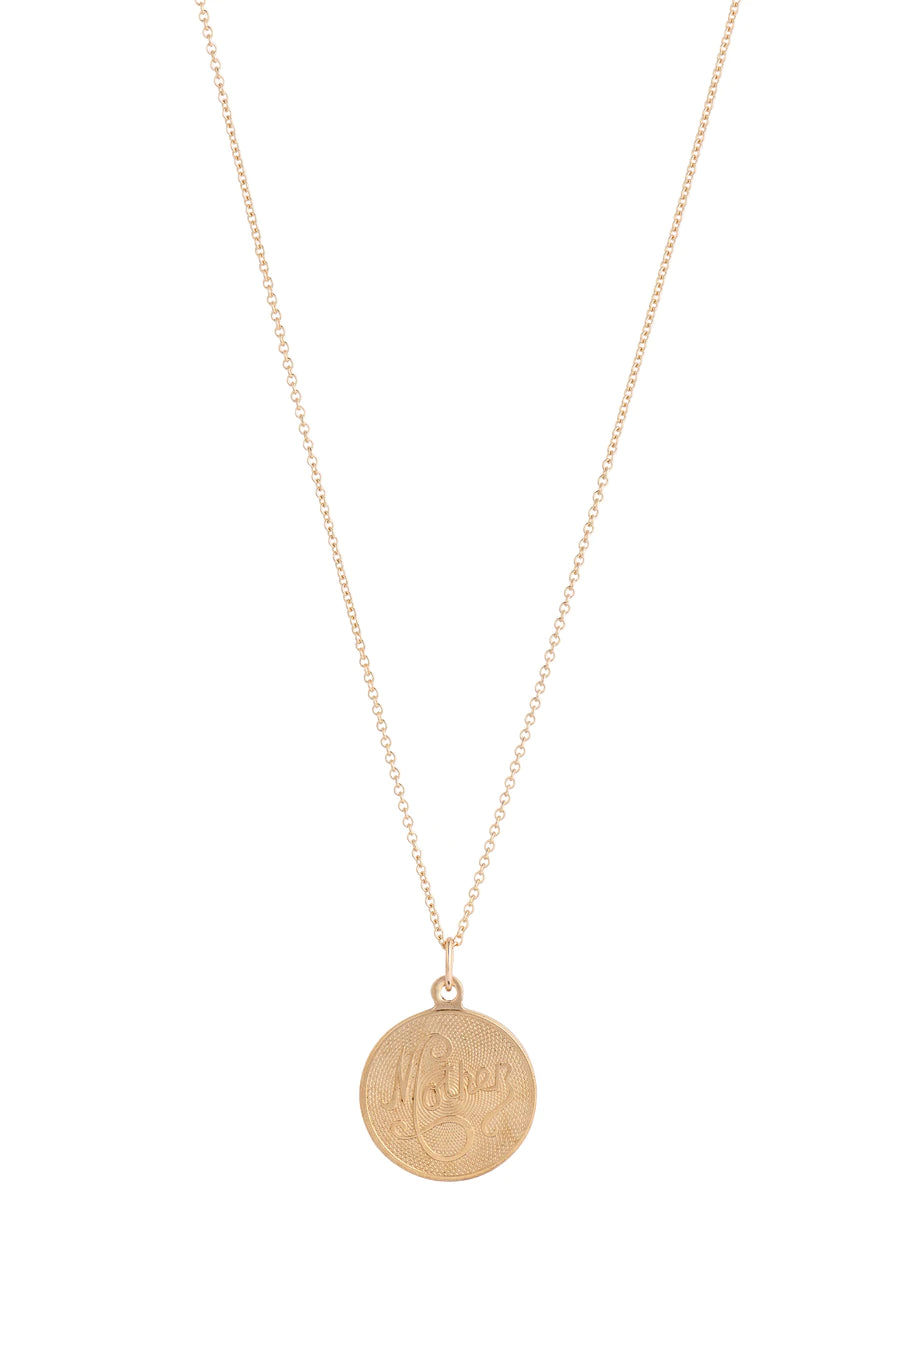 Mother Necklace - Gold - Lisbeth